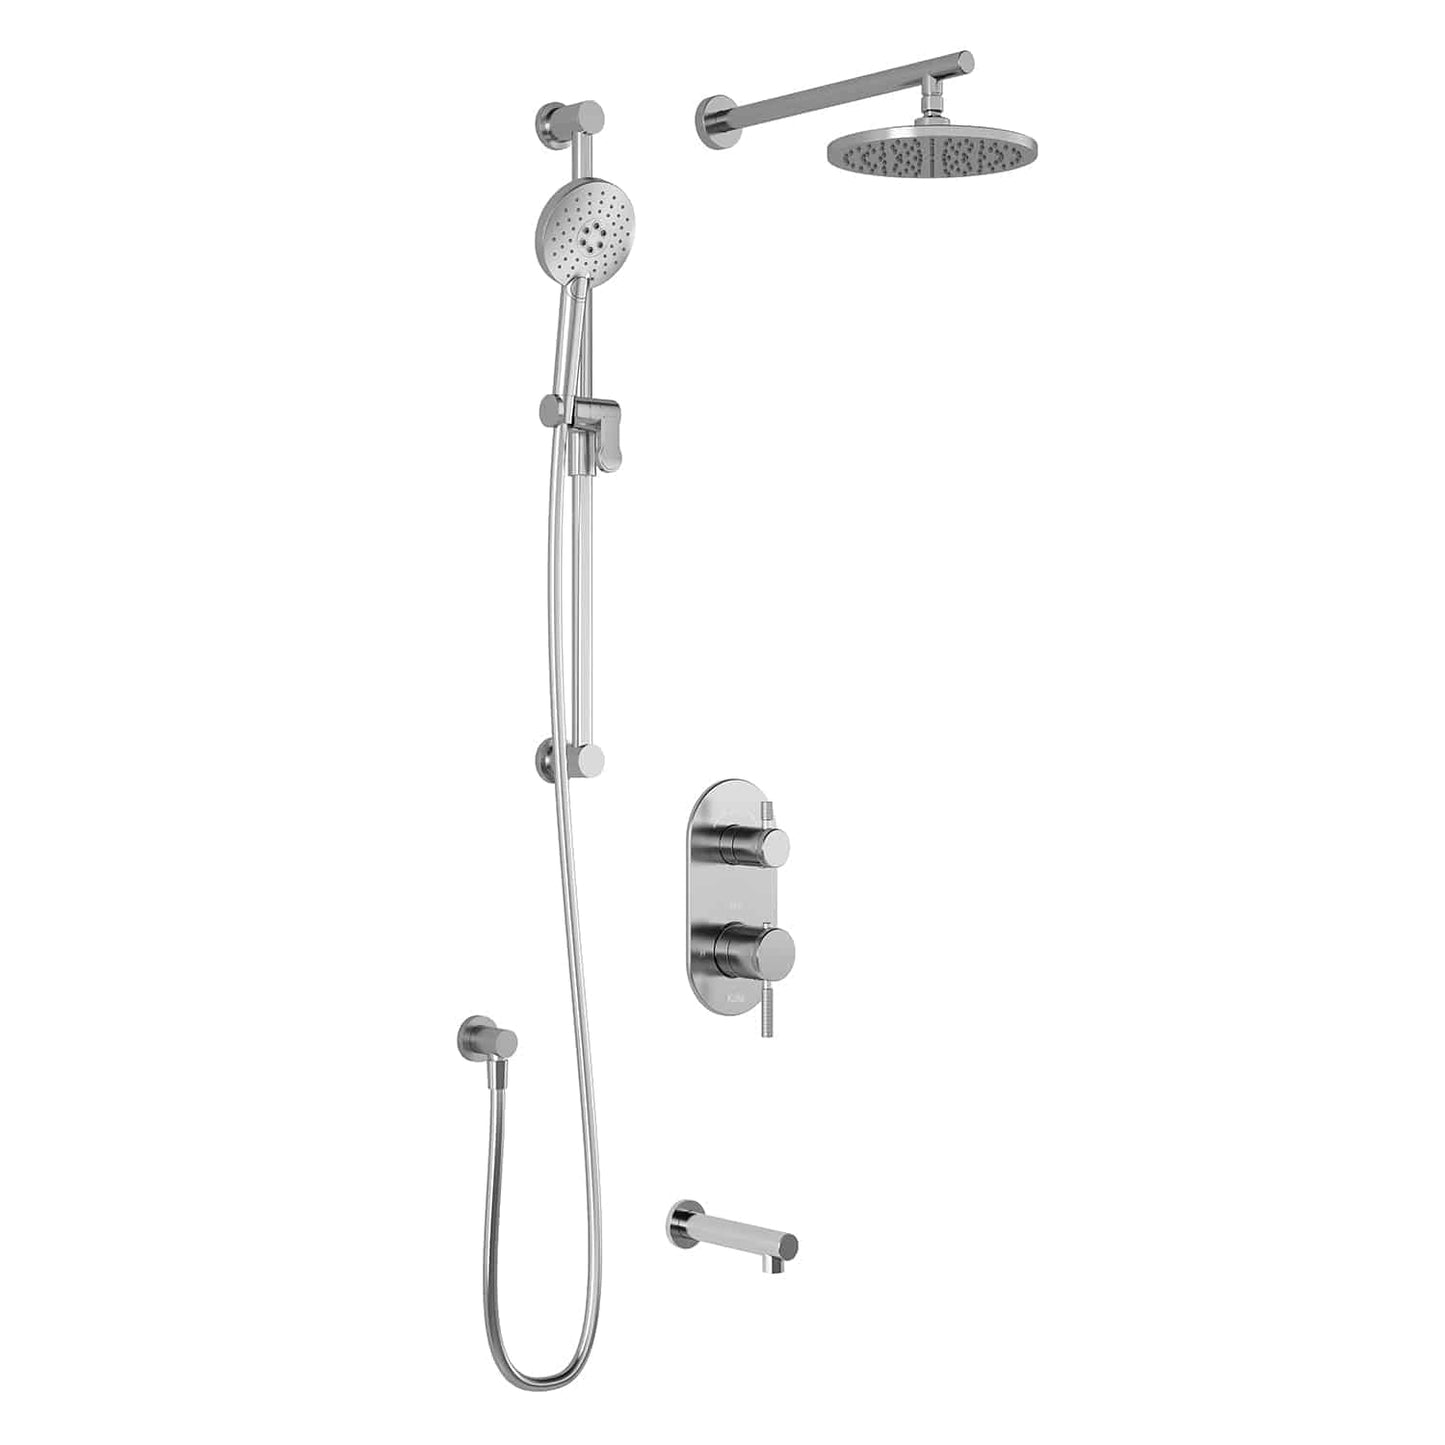 Kalia PRECISO TD3 : AQUATONIK T/P with Diverter Shower System with 9" Round Shower Head and Hand Shower with Wall Arm -Chrome